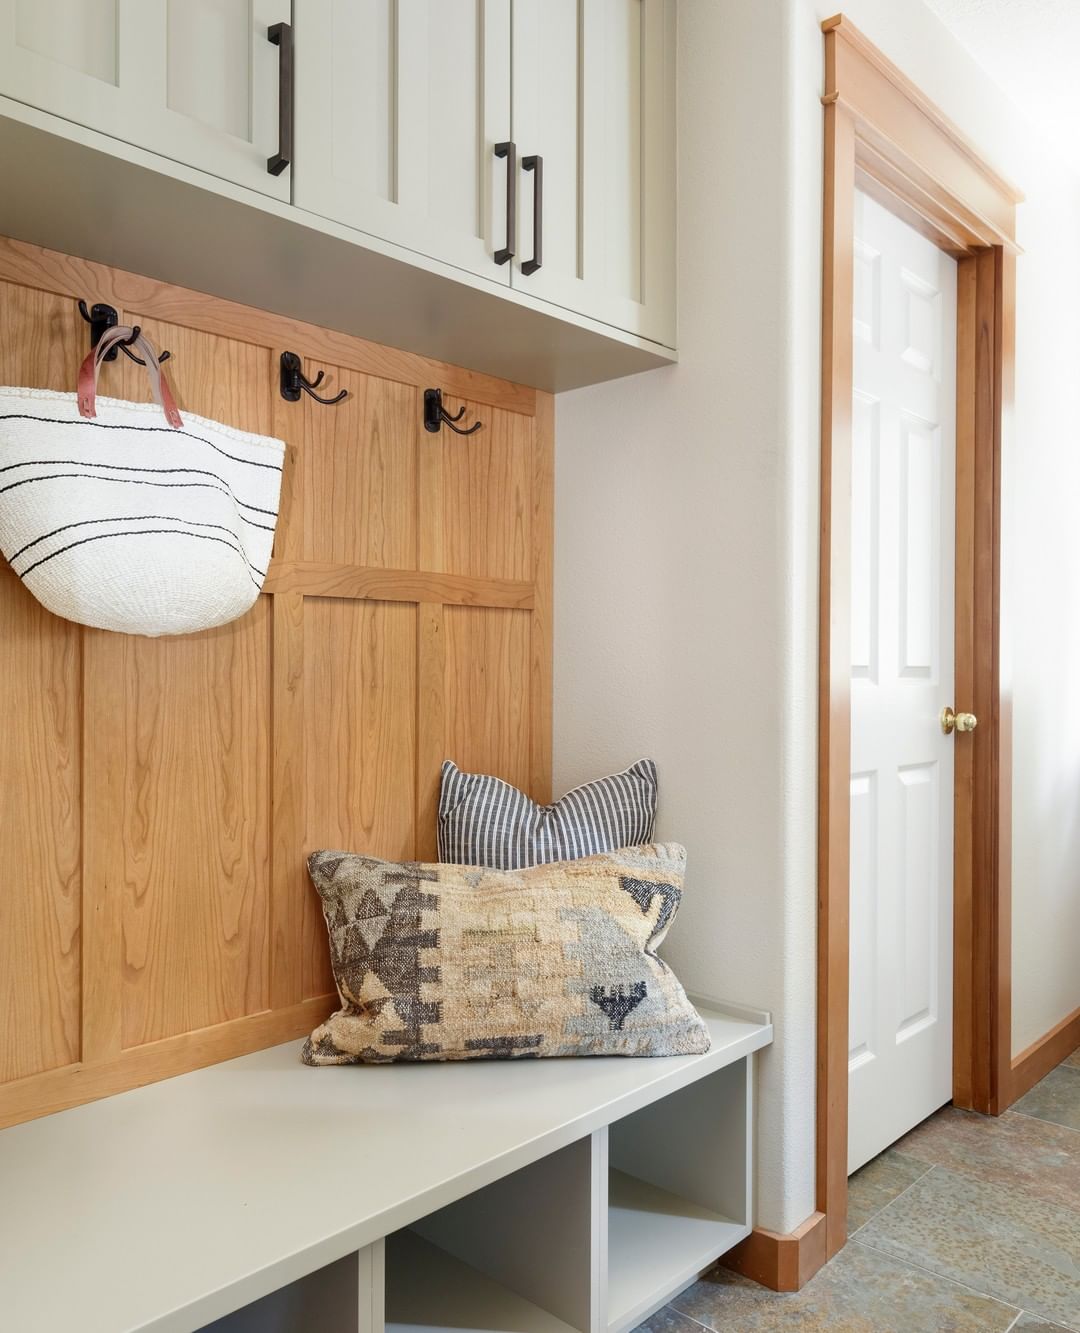 Mudroom with hooks for storage. Photo by Instagram user @amypearsondesign